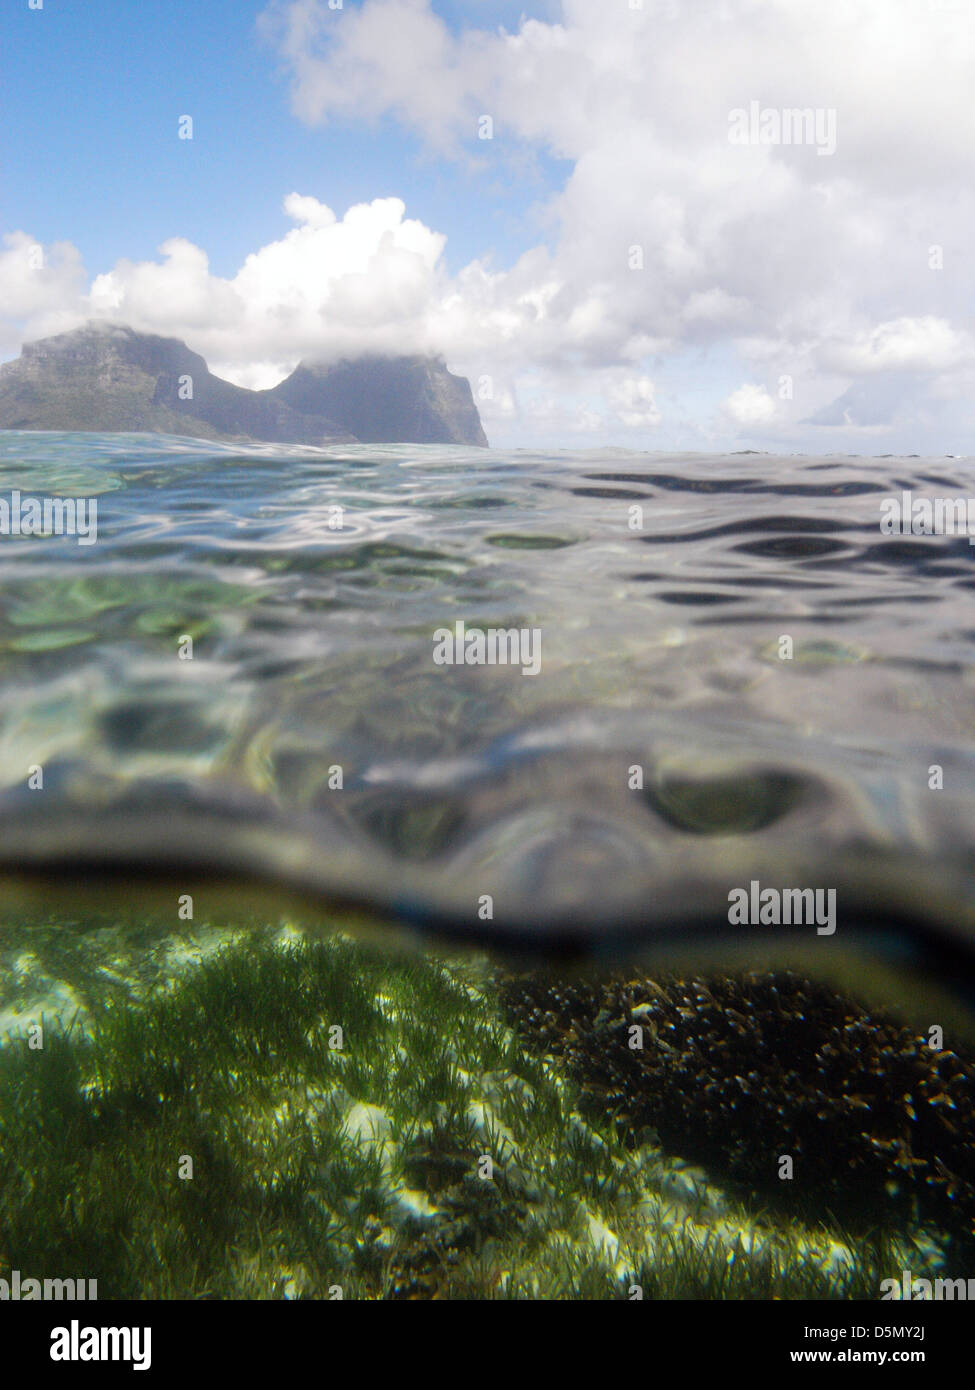 Seagrass meadow and corals (Acropora sp.) in the lagoon in North Bay, Lord Howe Island, Australia Stock Photo